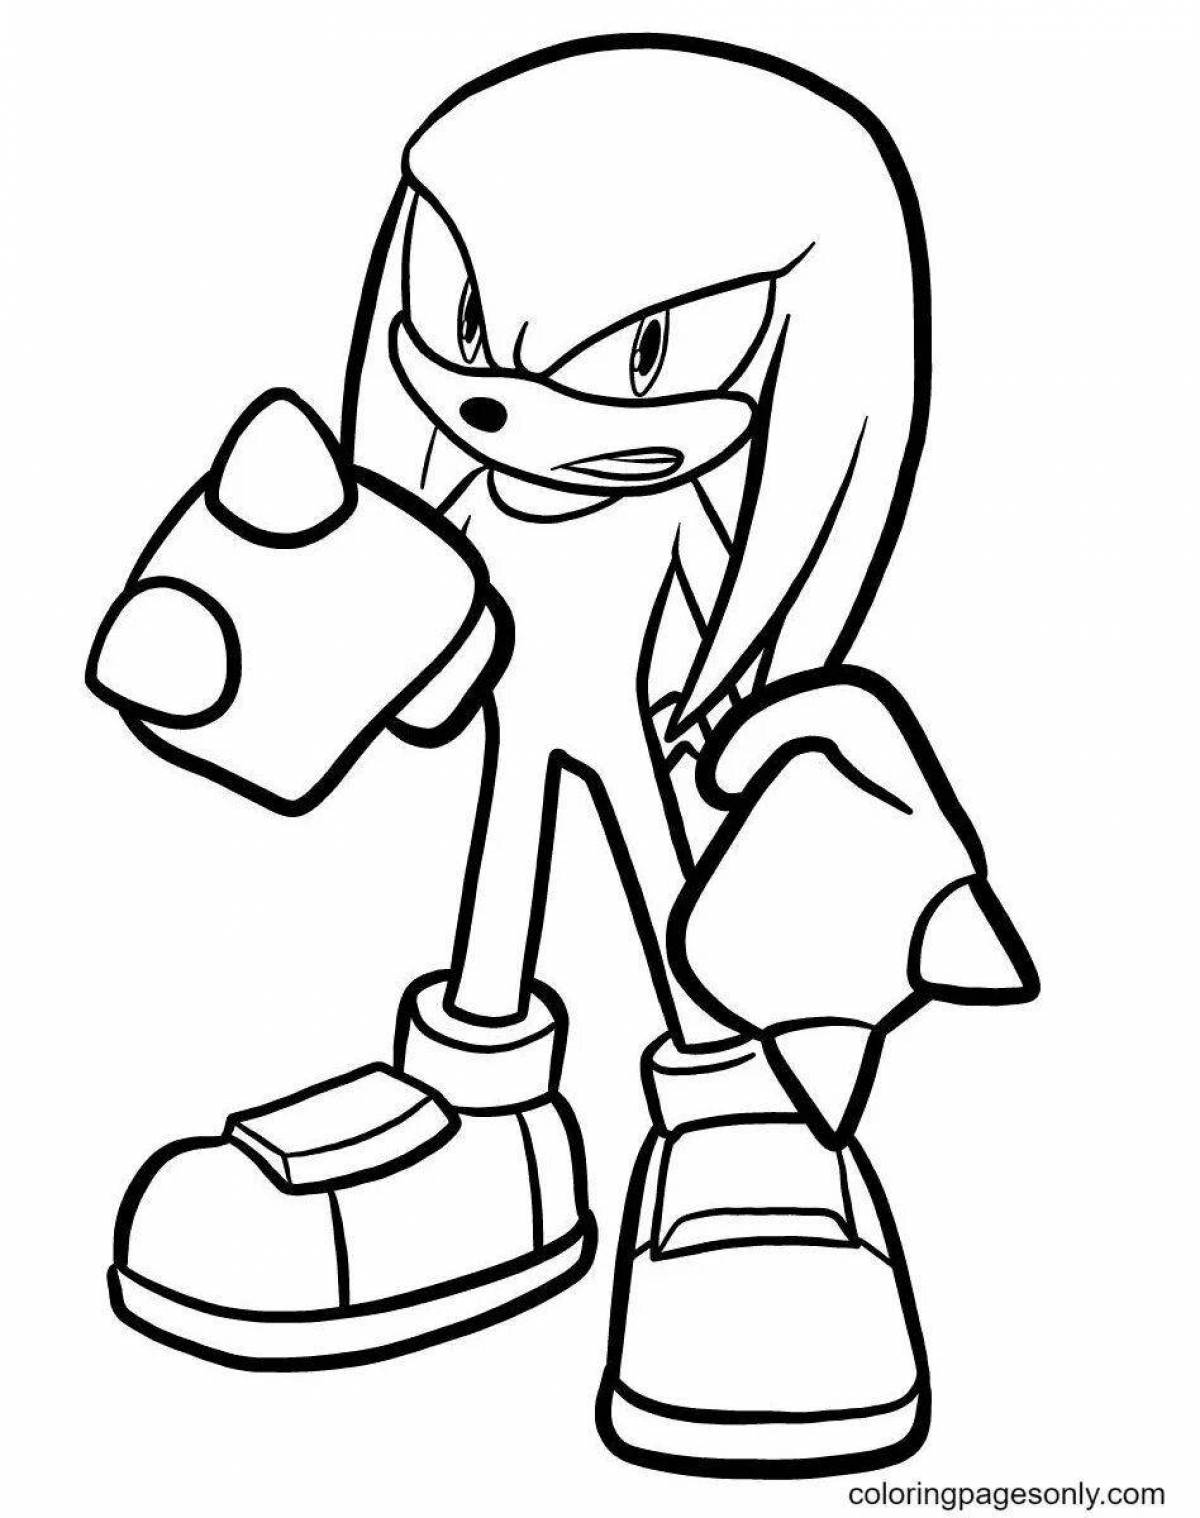 Sonic knuckles #4